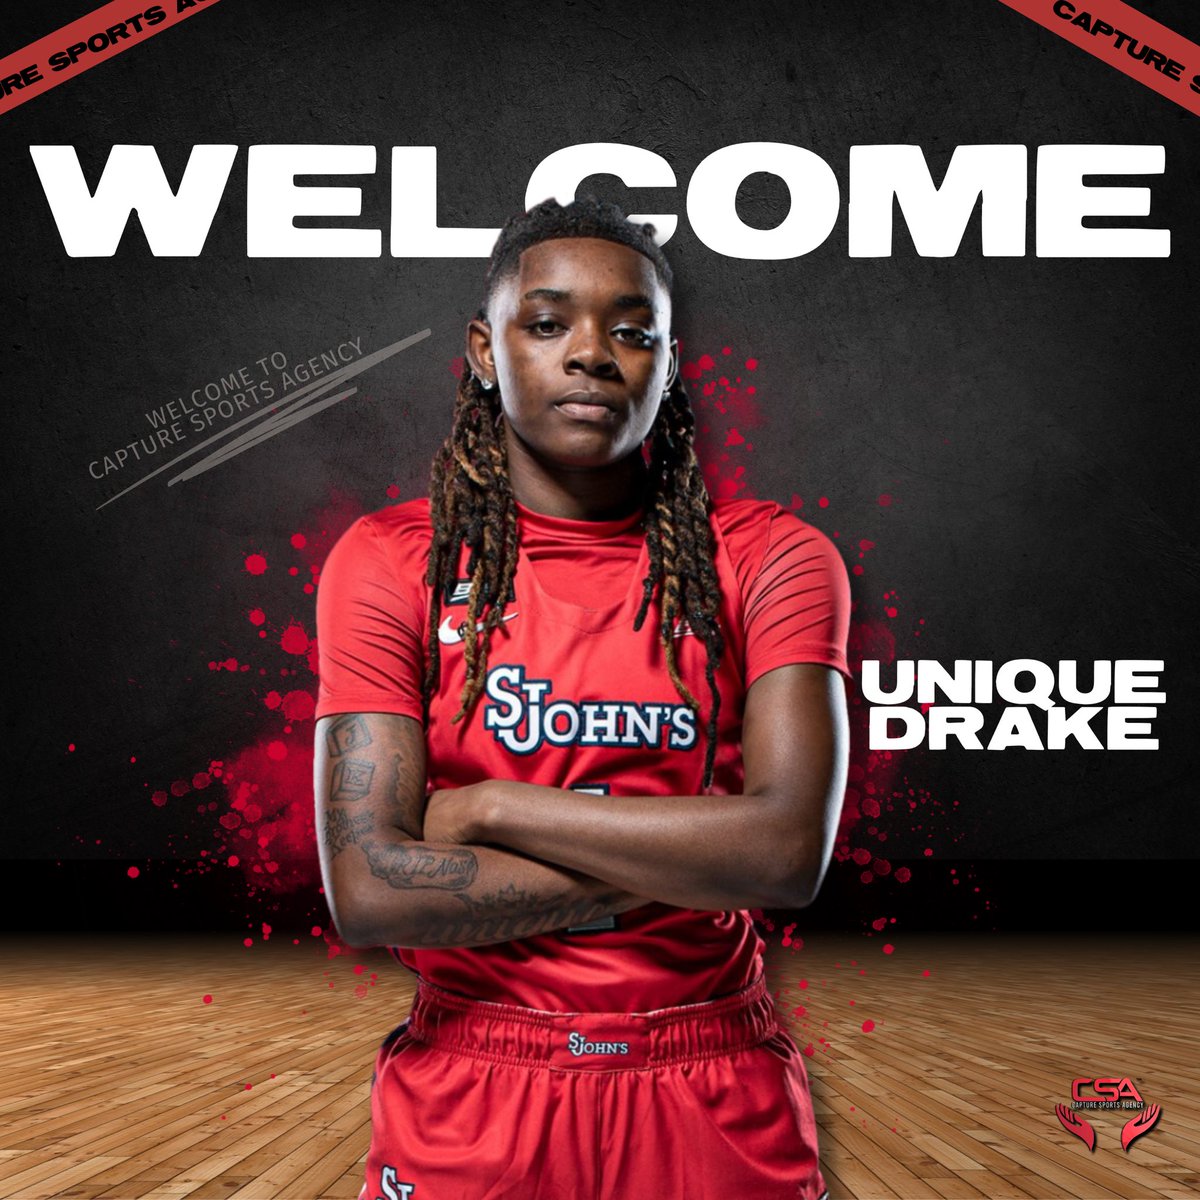 Welcome Unique Drake to the CSA family!!